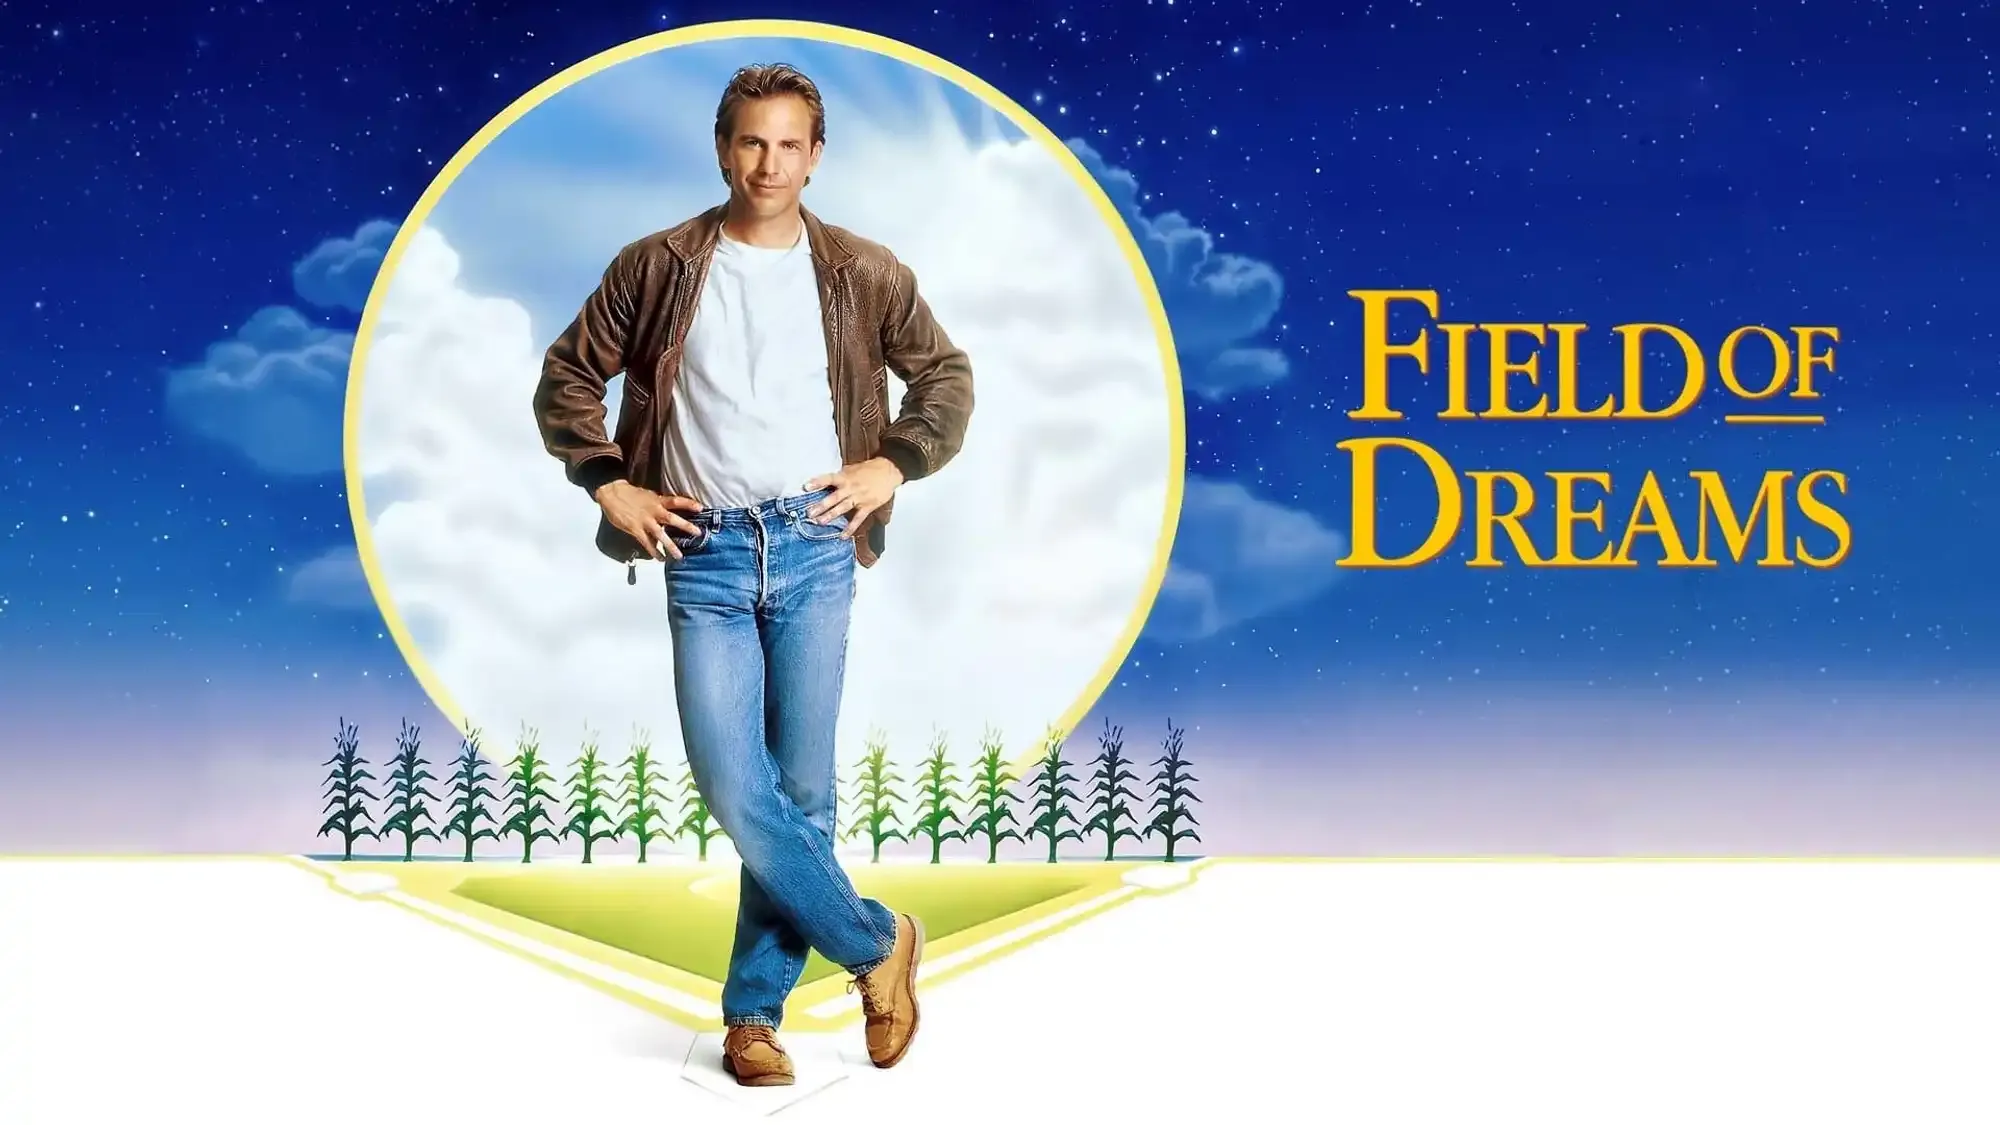 Field of Dreams movie review